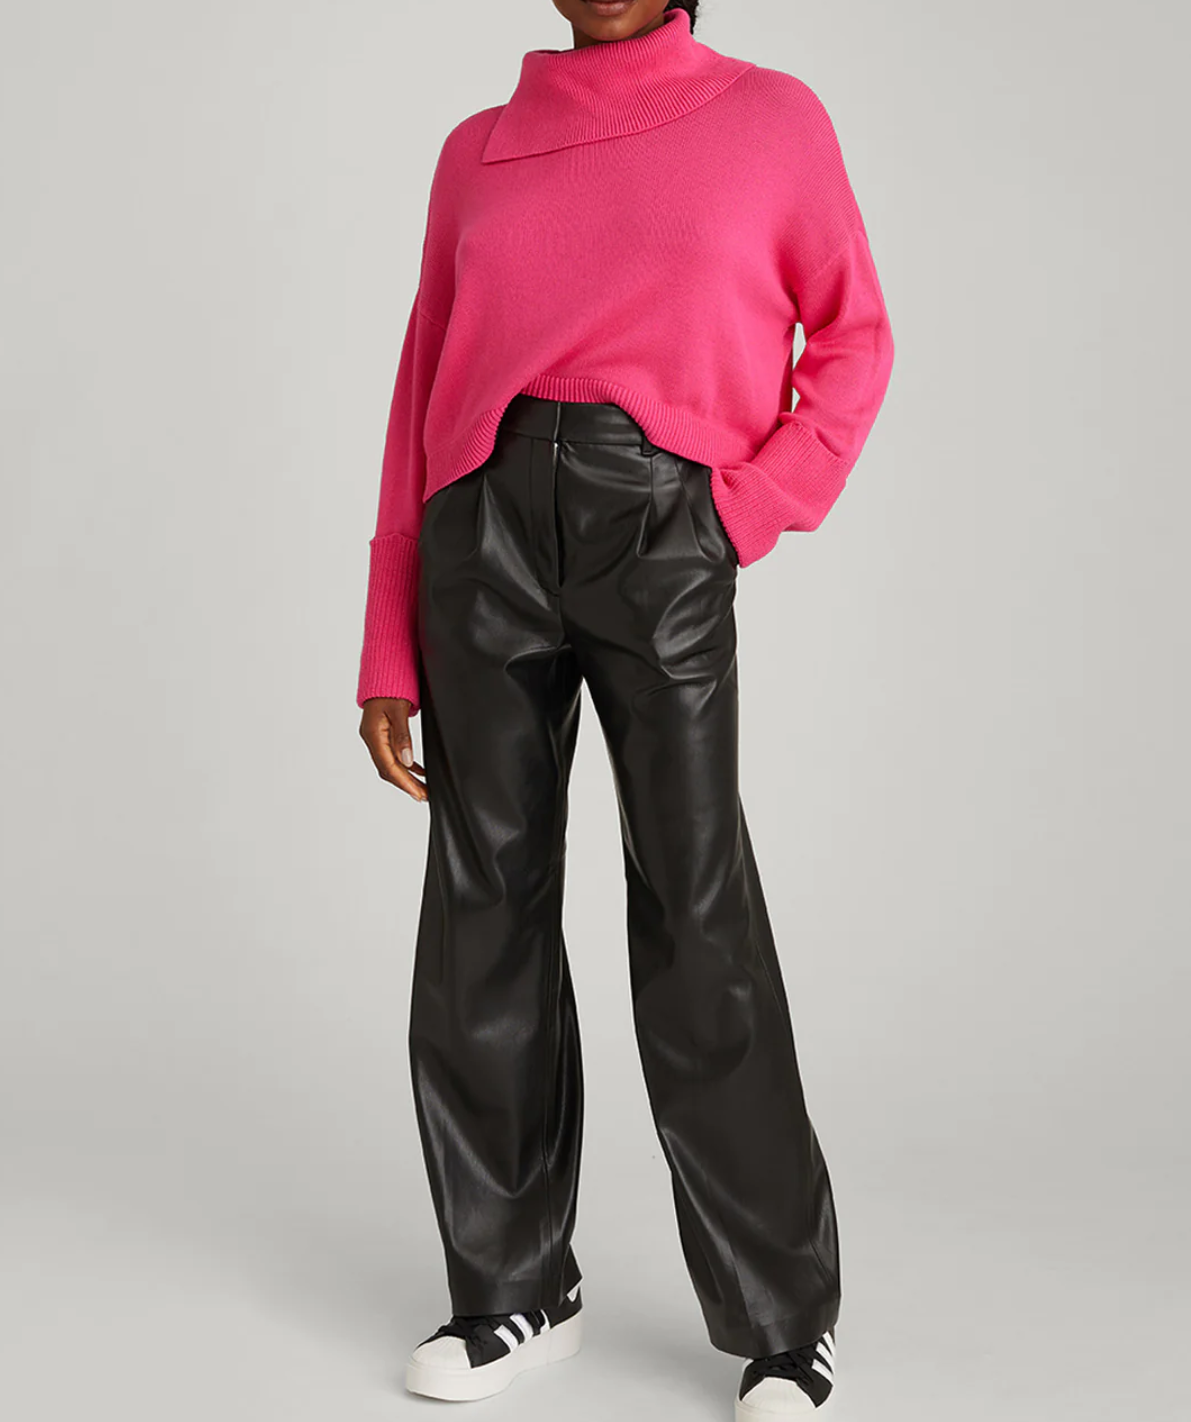 LILY SPLIT TURTLENECK SWEATER, FULL BODY VIEW STYLED WITH LEATHER PANTS